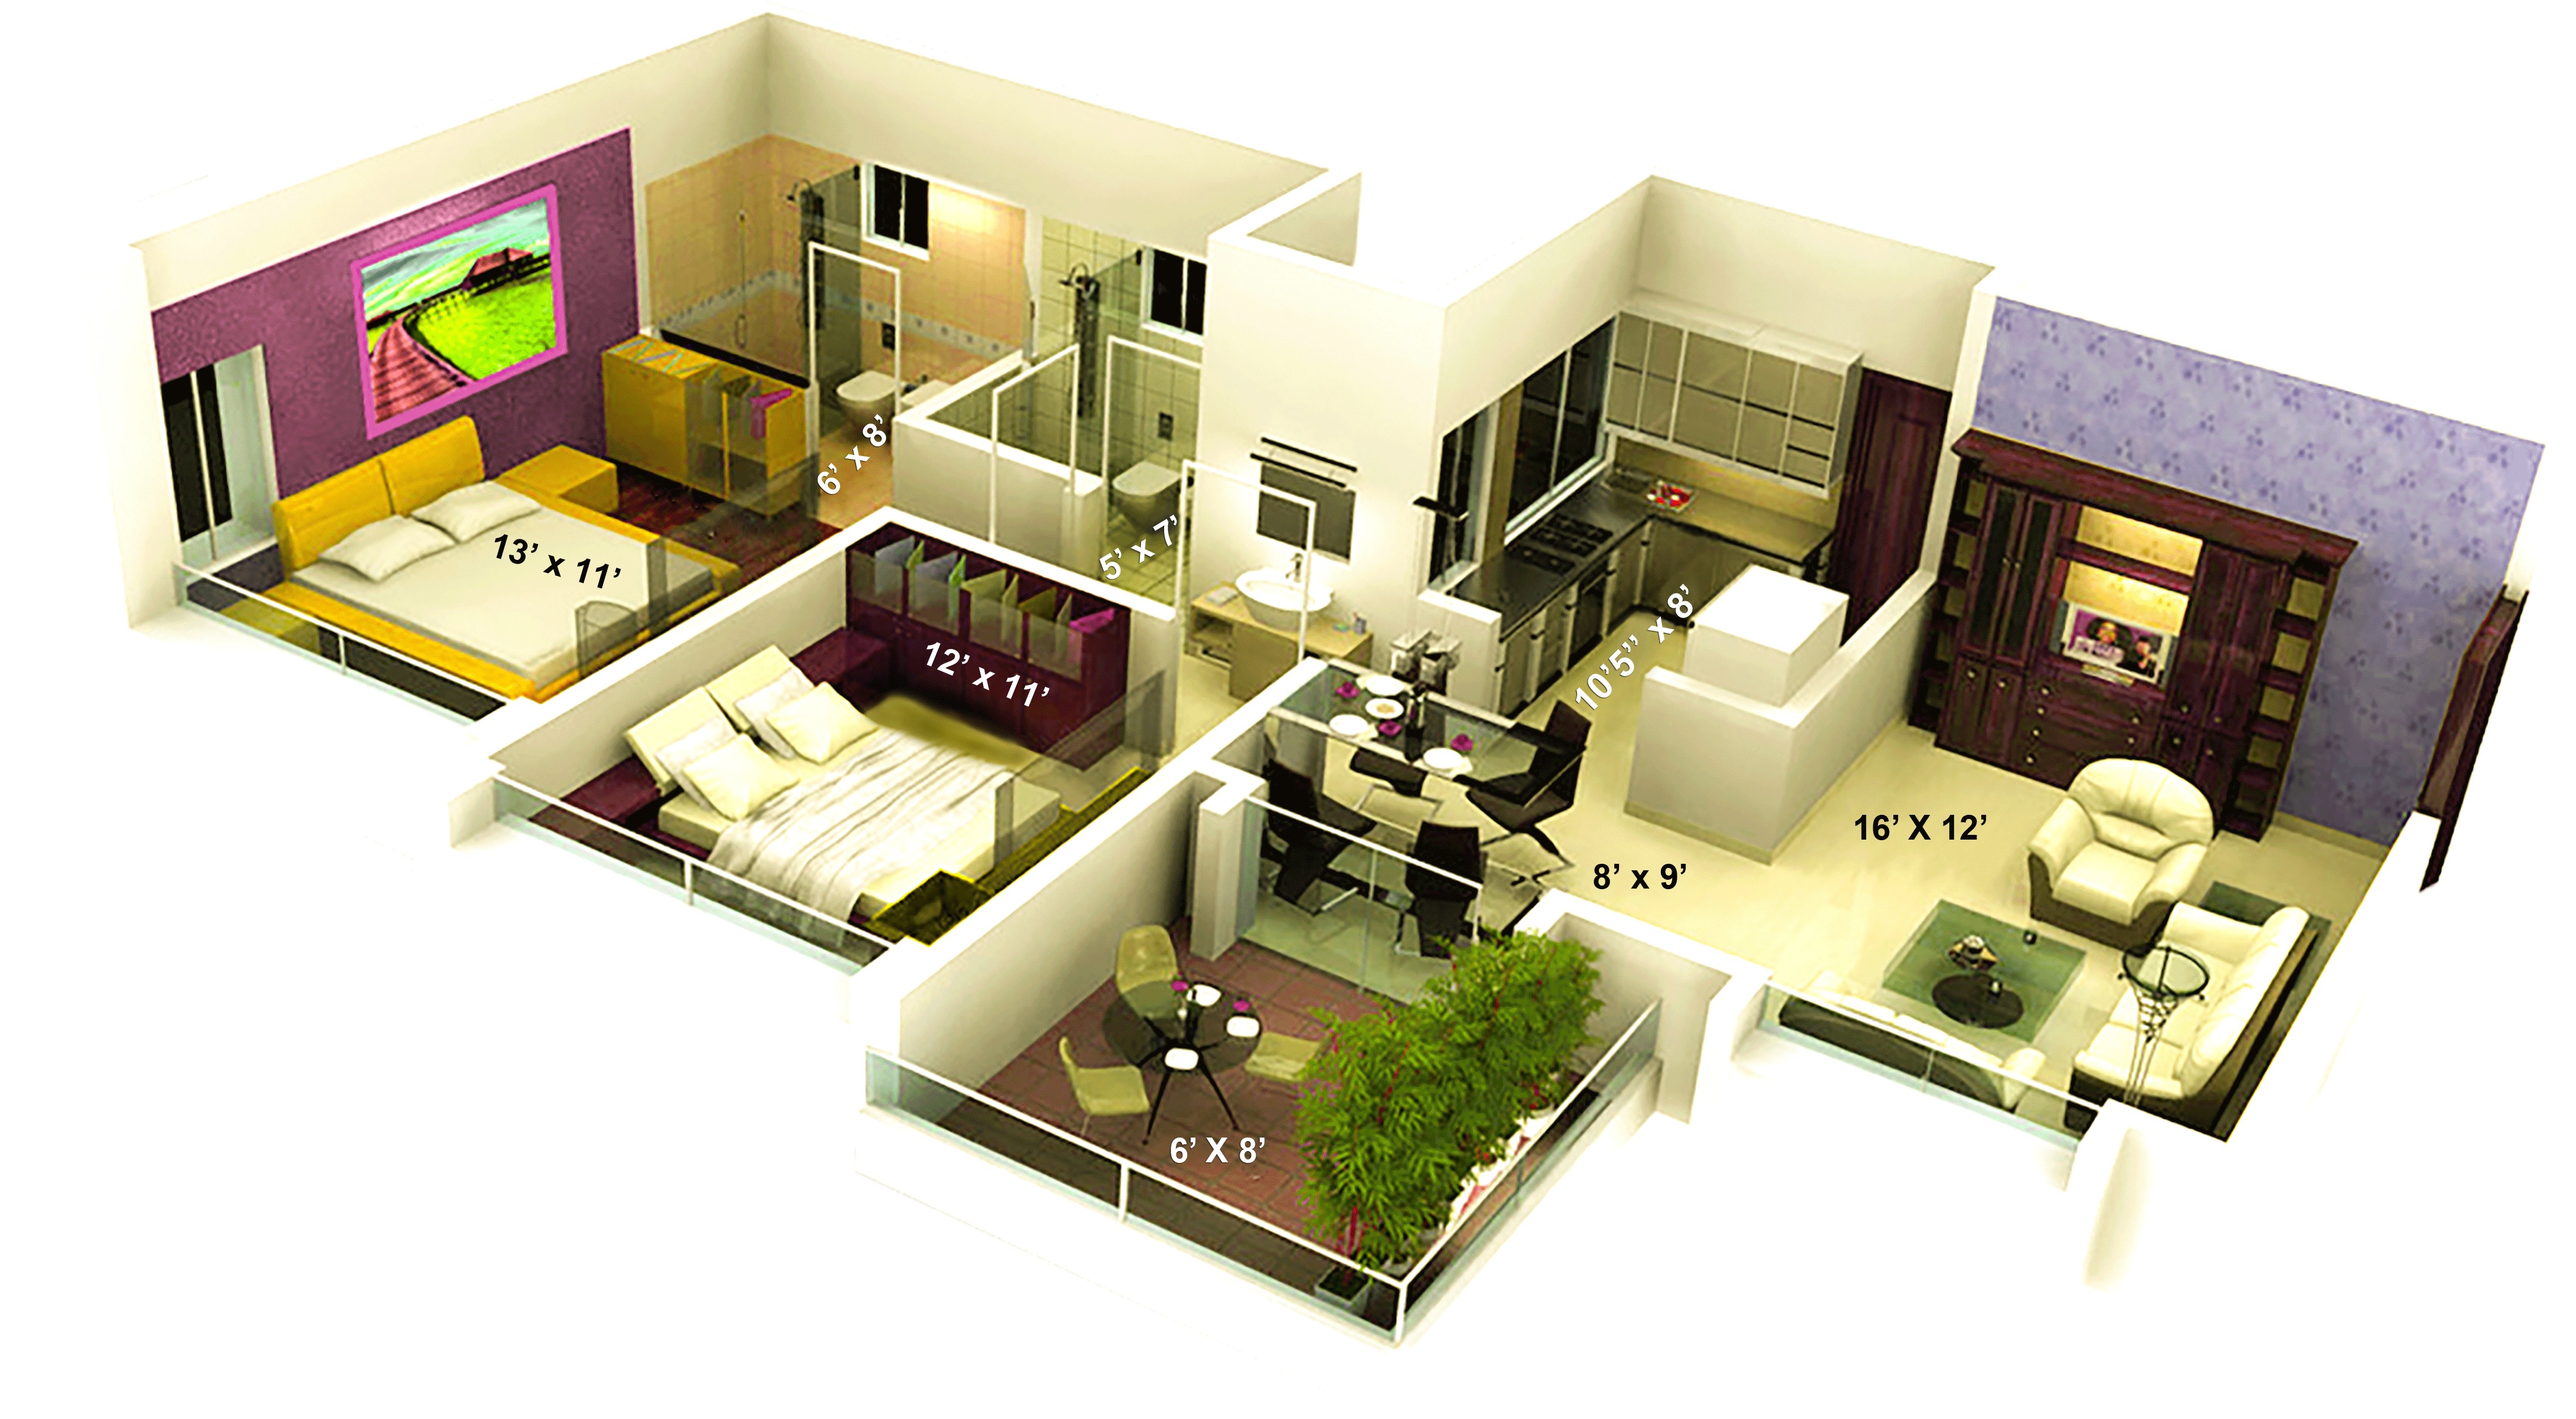 House Plan for 600 Sq Ft In India | plougonver.com